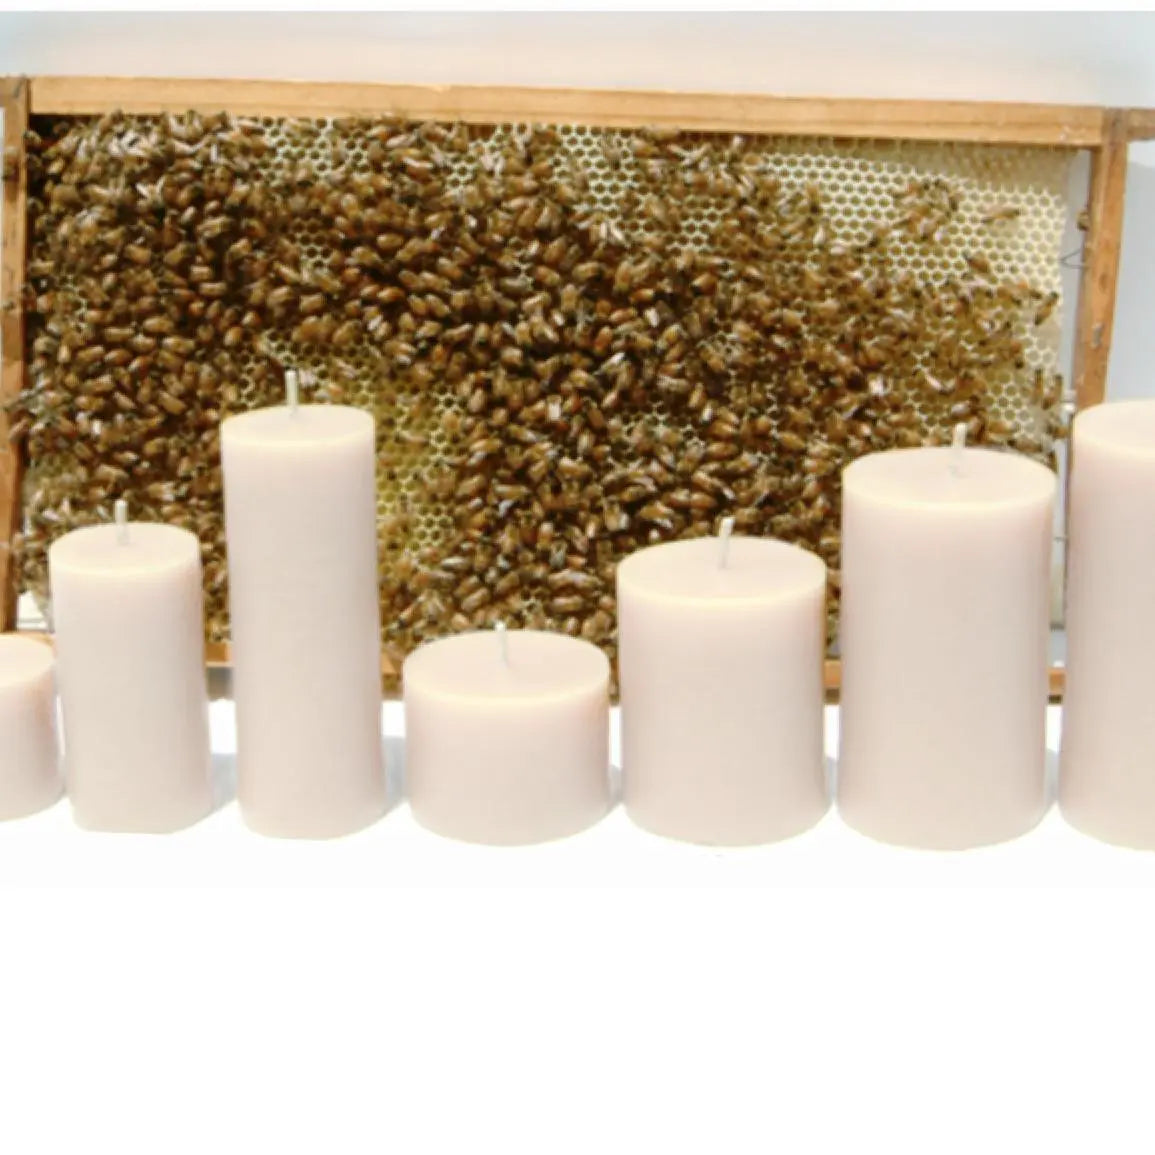 Smooth Ivory Beeswax Pillar Candles - Home Smith